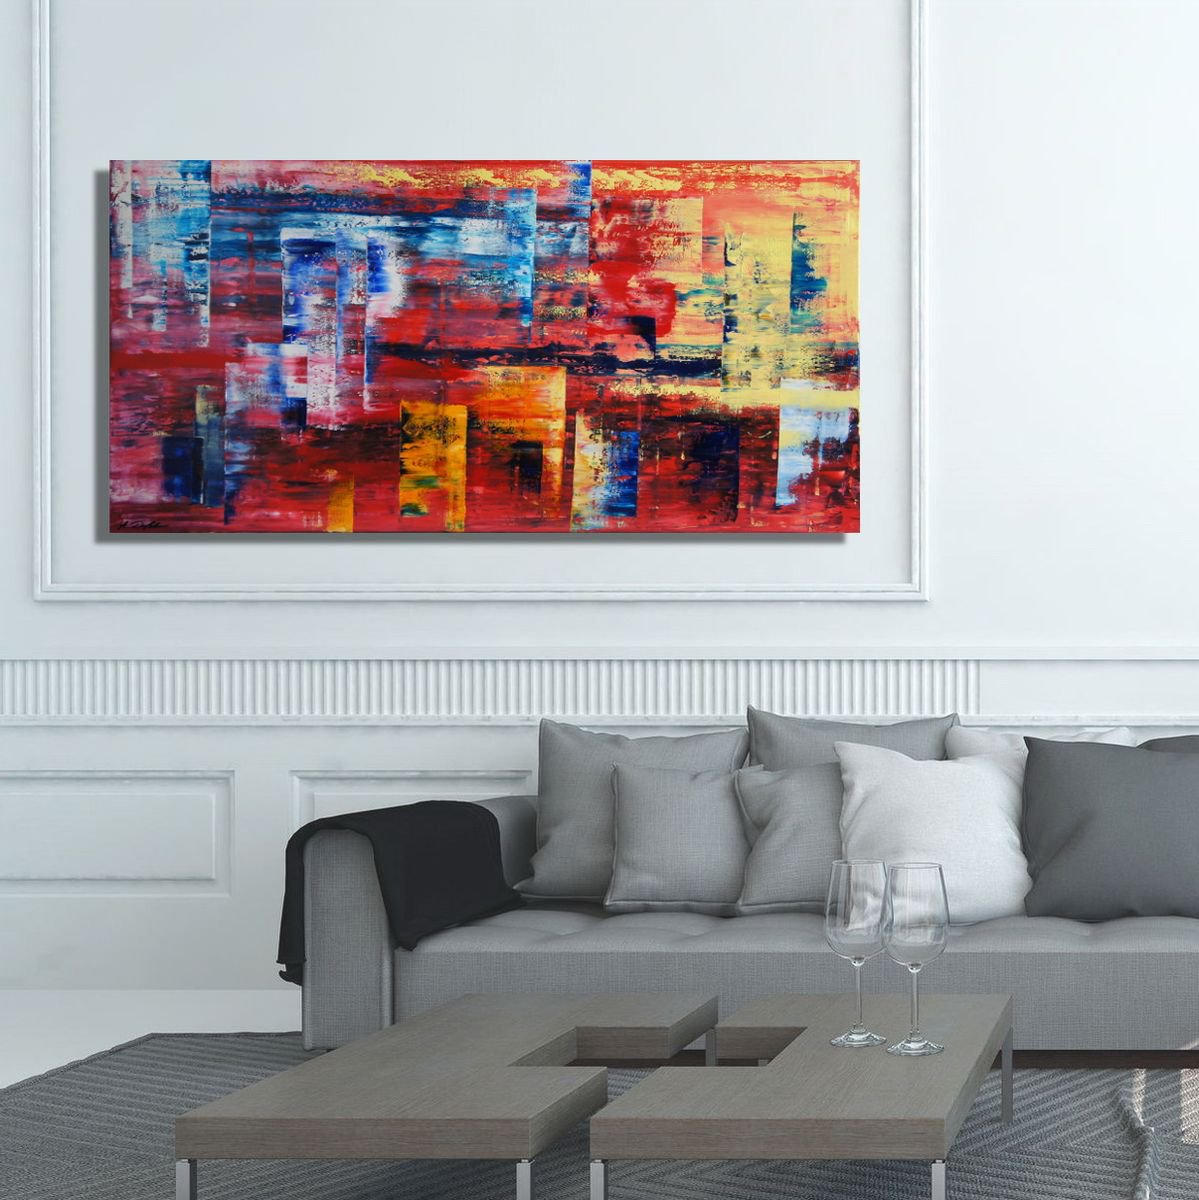 Fire And Ice (140 x 70 cm) (56 x 28 inches) oil XXL by Ansgar Dressler